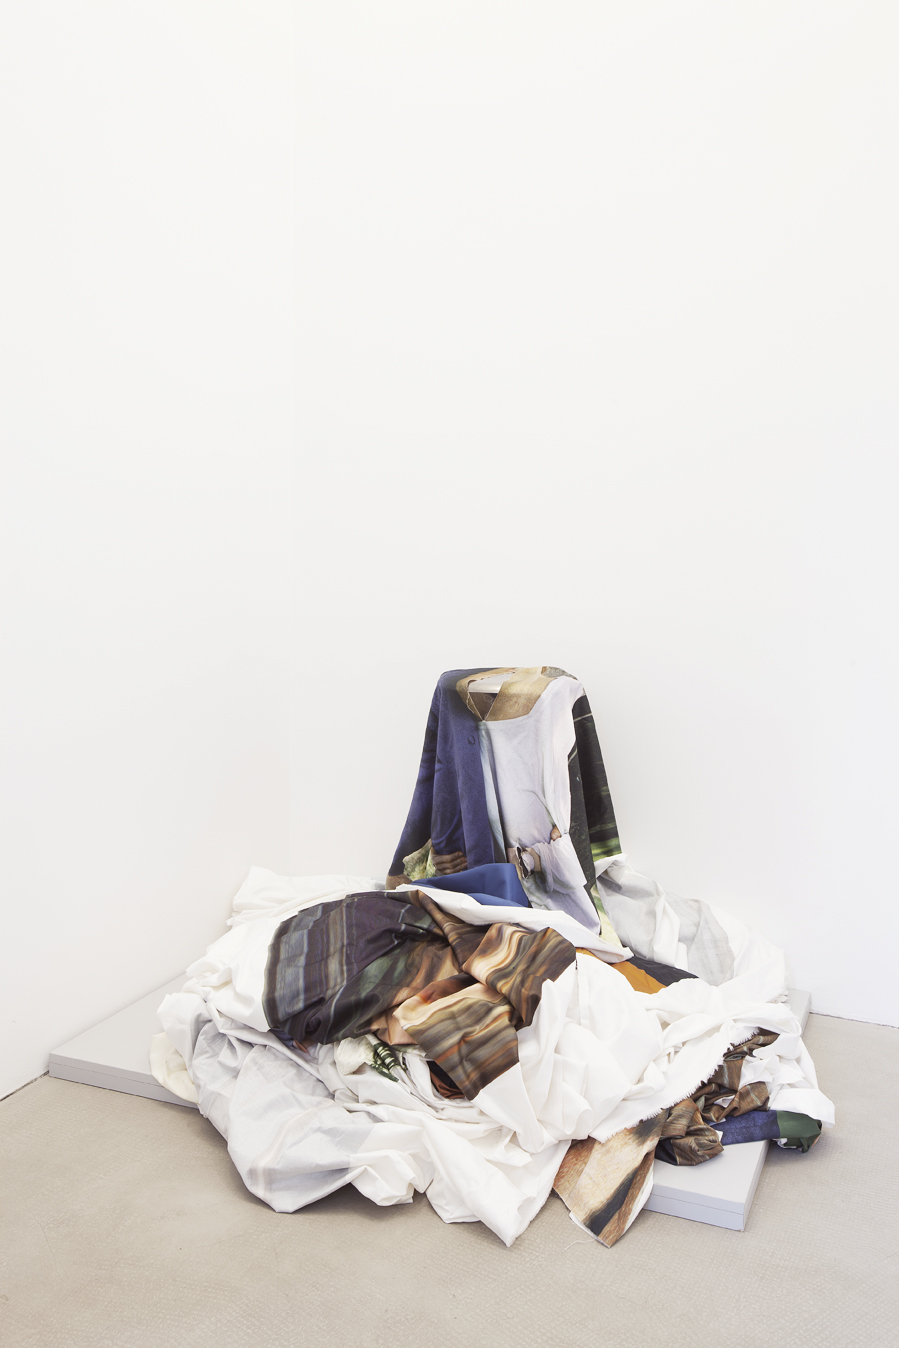 <p>D/Innertime (2012) after the performance, printed cotton, stool, and iron rod</p>
